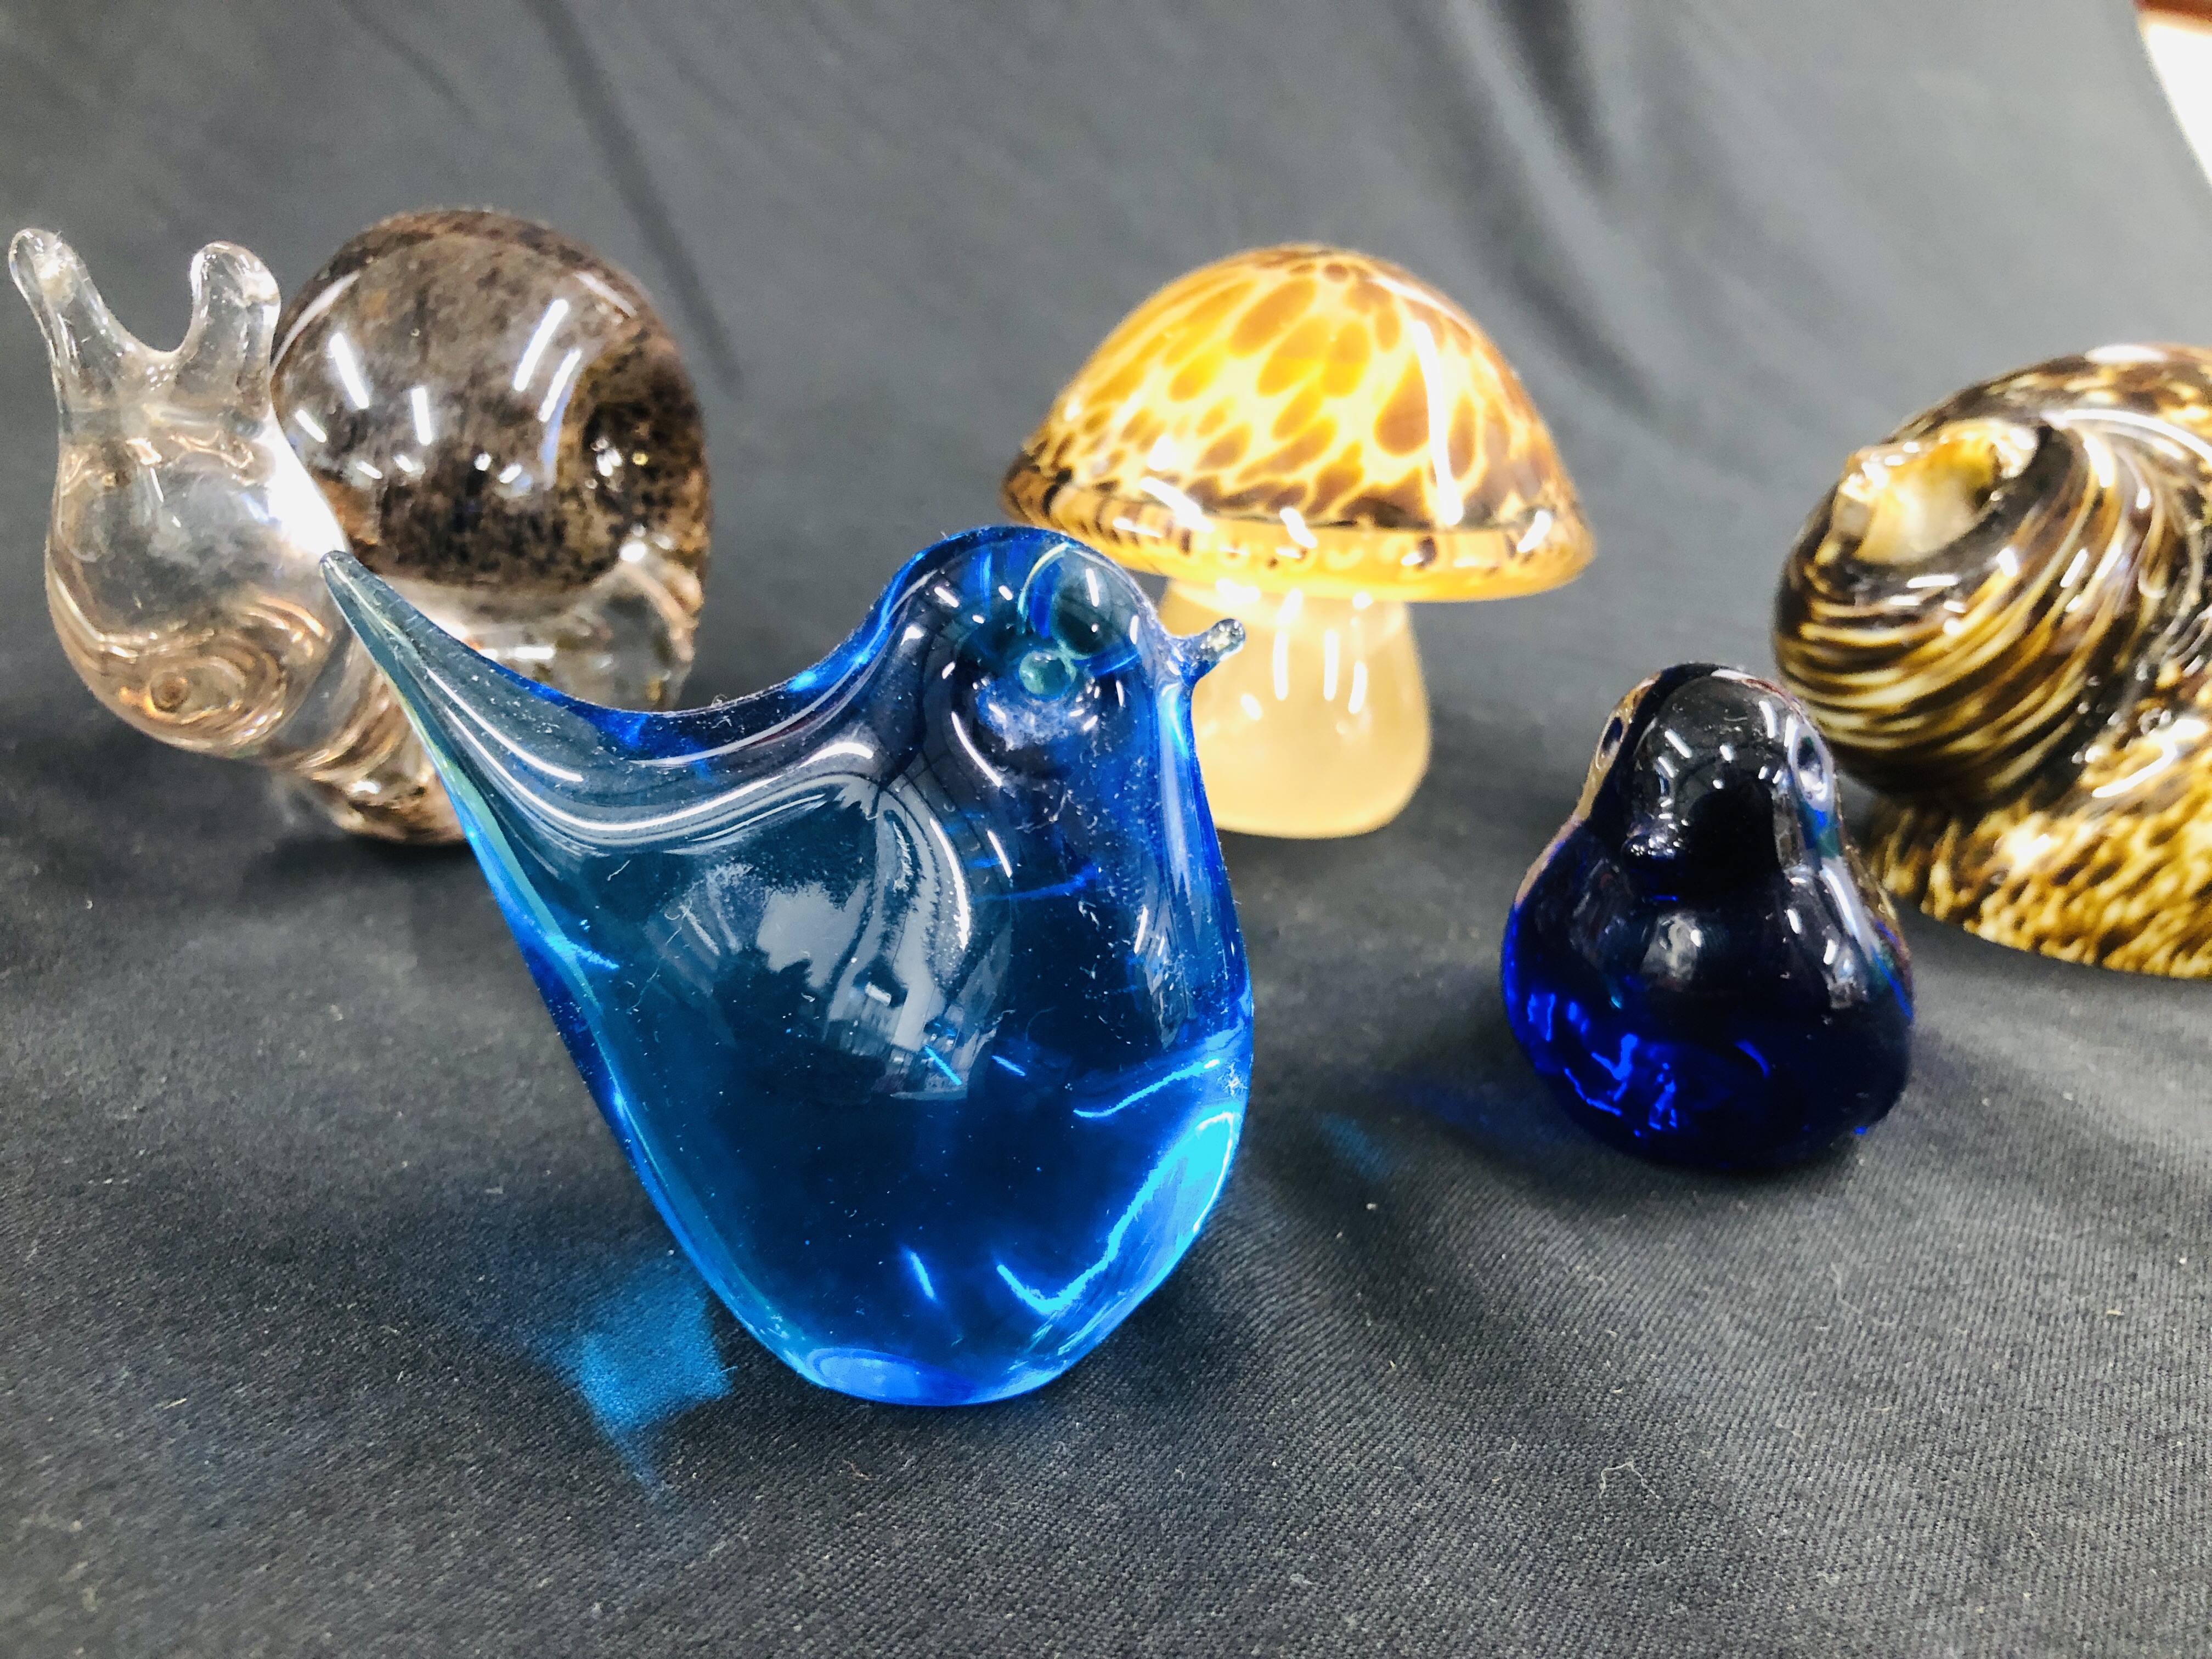 A GROUP OF 5 ART GLASS PAPERWEIGHTS TO INCLUDE 2 SNAILS AND 2 BIRDS ALONG WITH A TOADSTOOL BEARING - Image 5 of 6